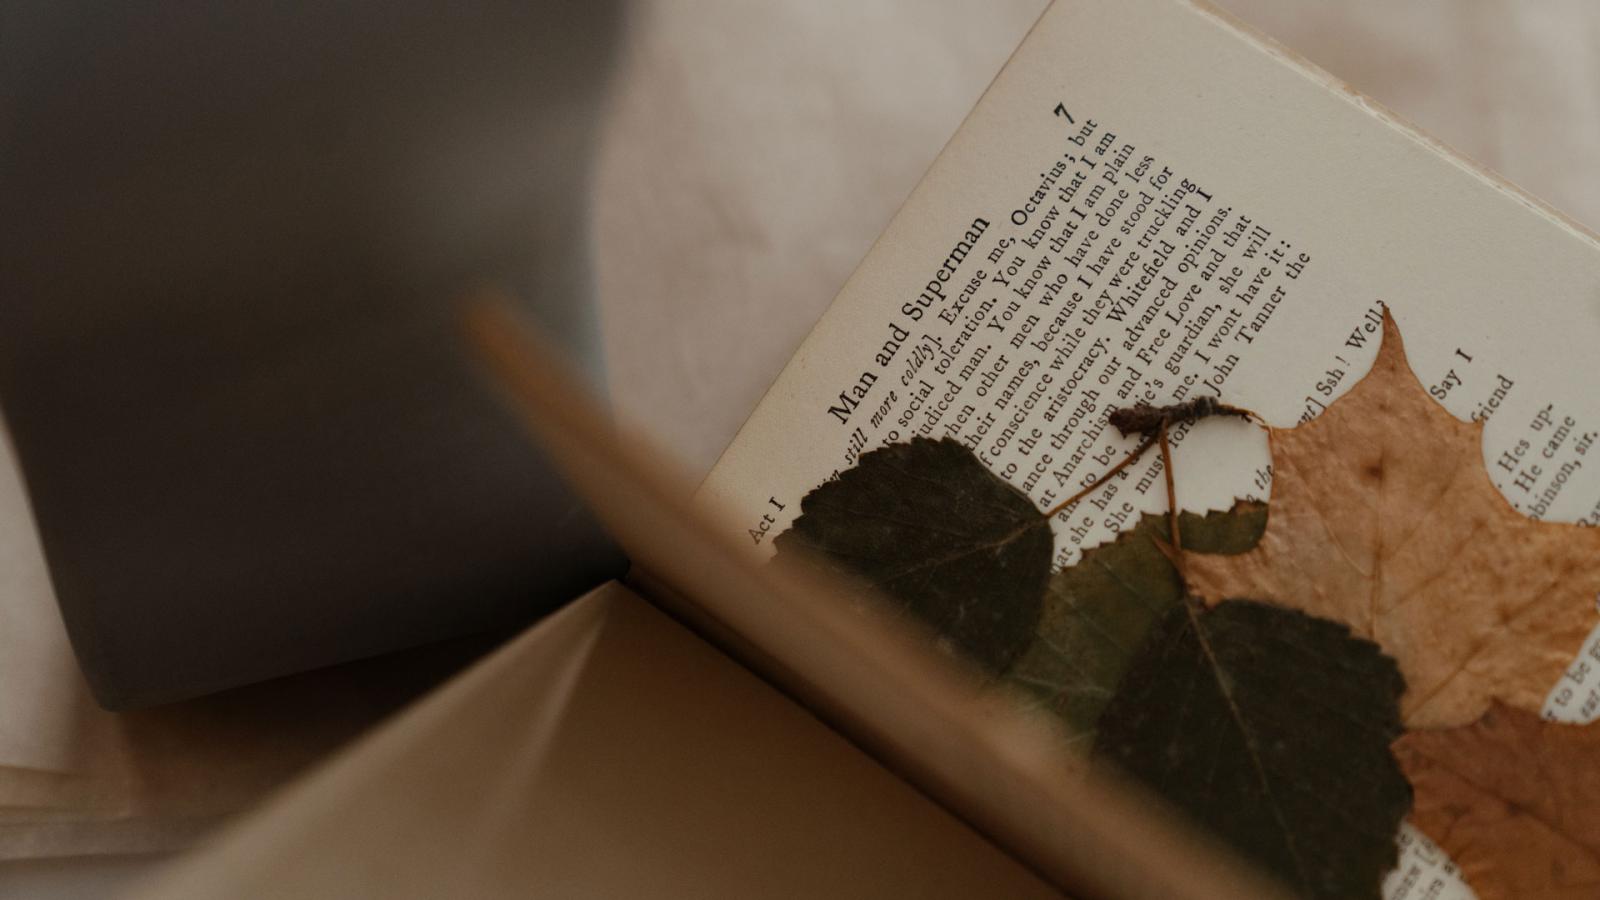 Book with pressed leaves